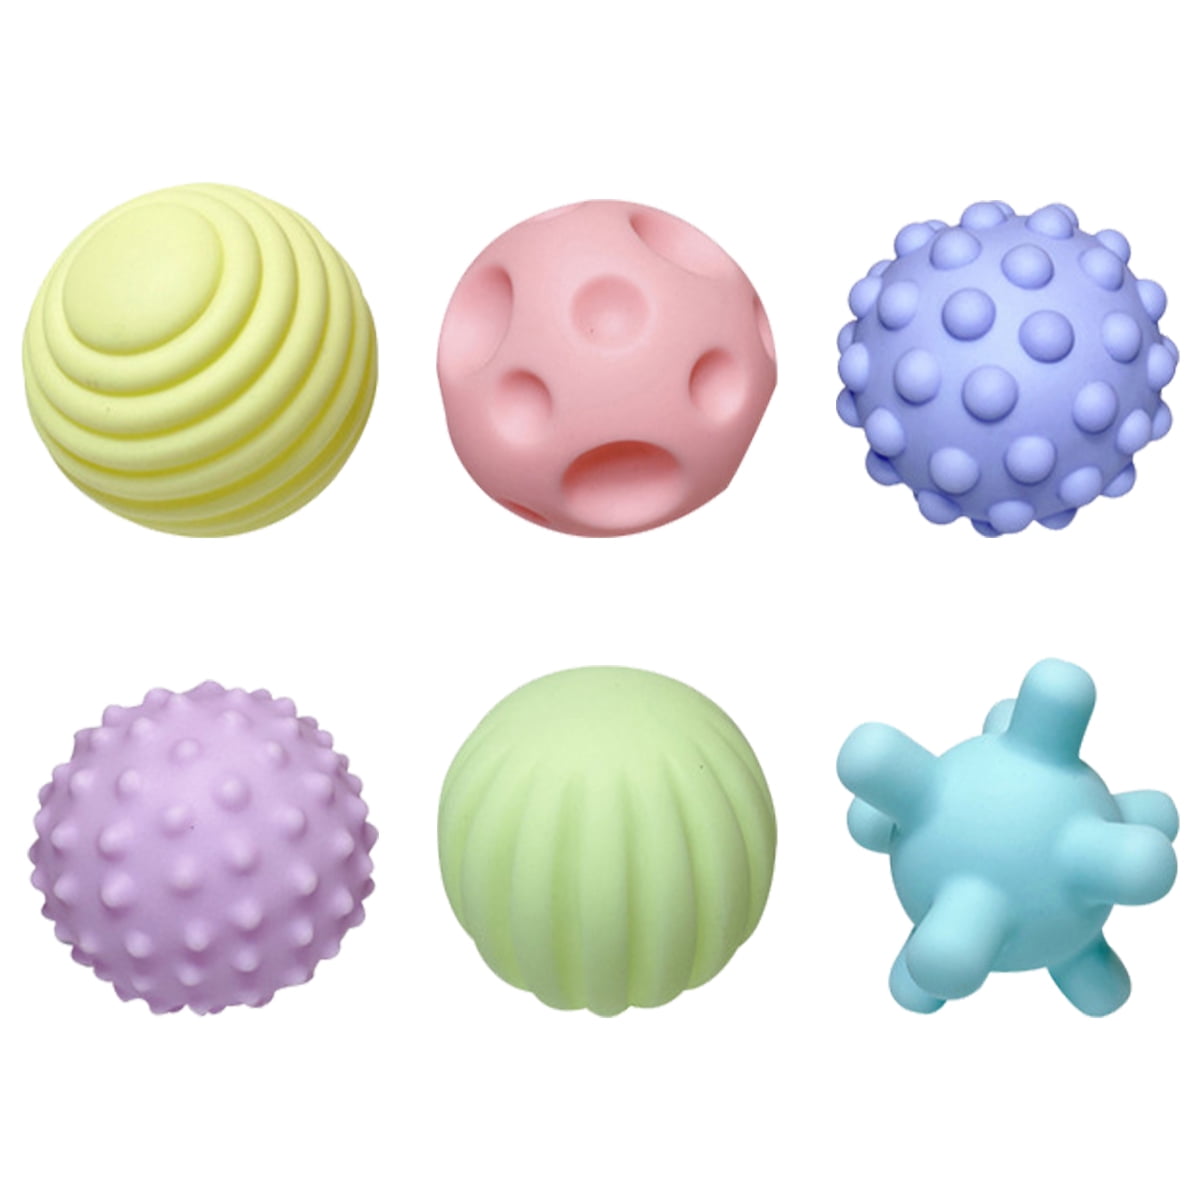 3 x Go Bounce Small Soft Ball Sensory Tactile Special Needs Educational Toy 